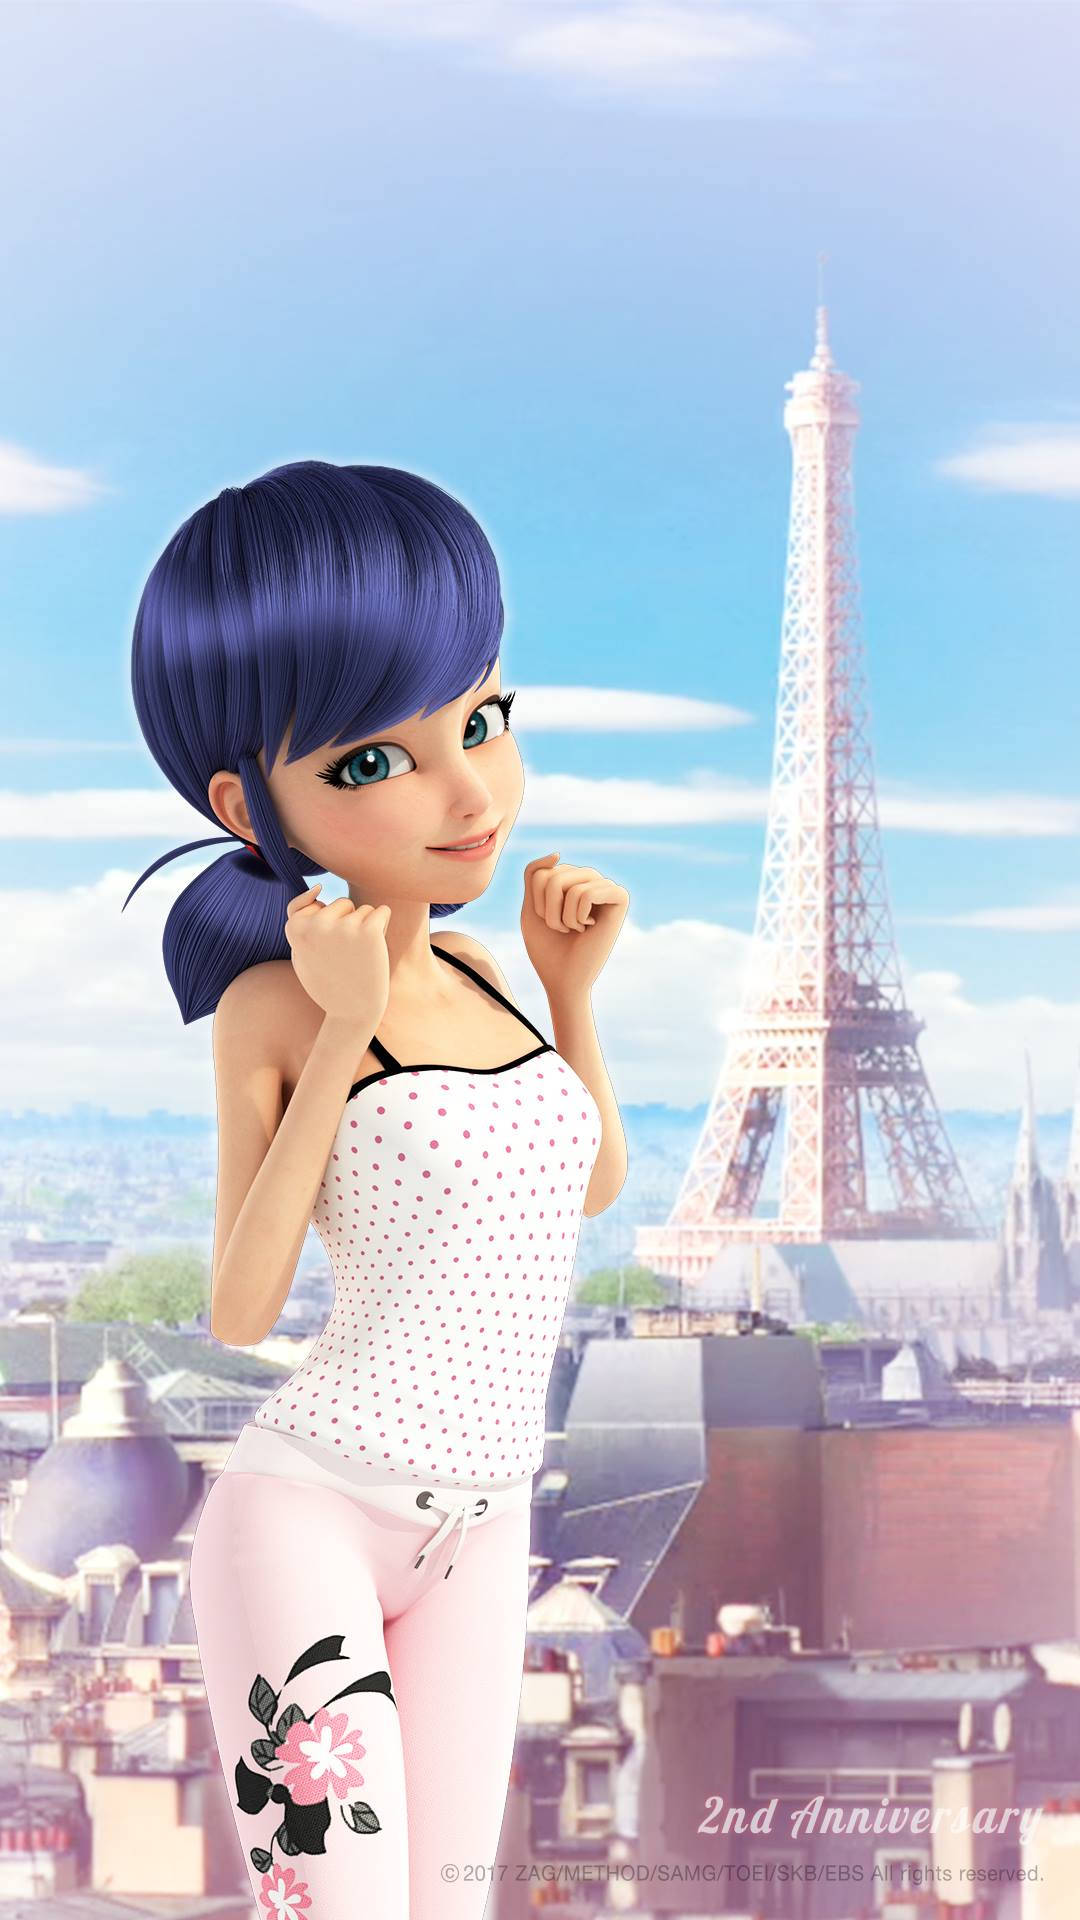 Marinette In New Official Image Wallpaper